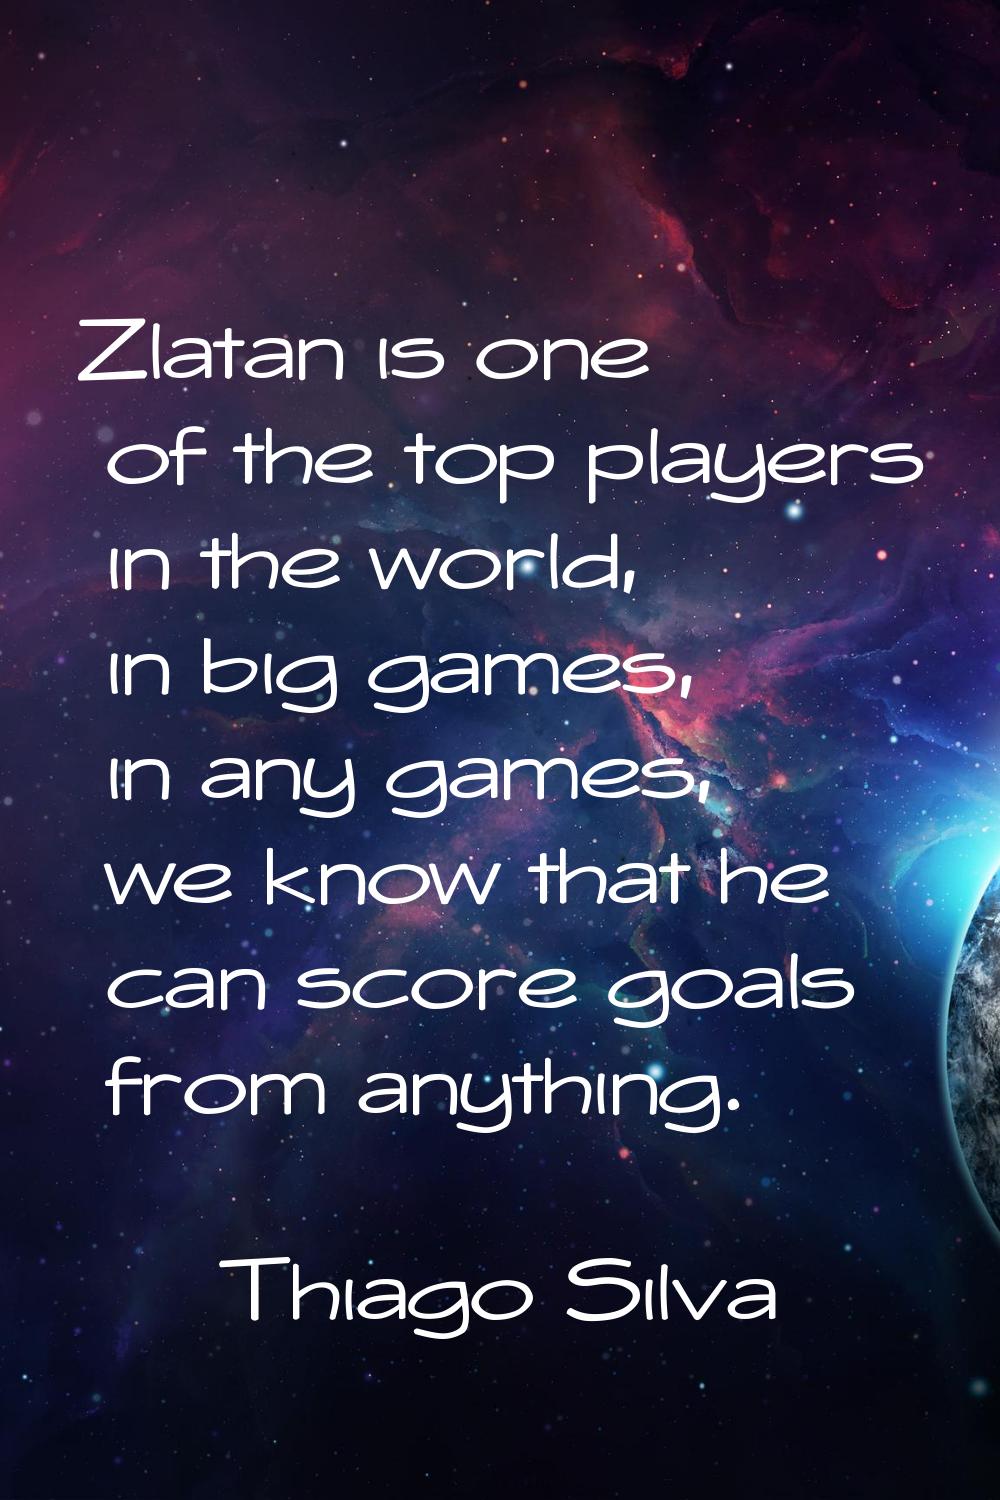 Zlatan is one of the top players in the world, in big games, in any games, we know that he can scor